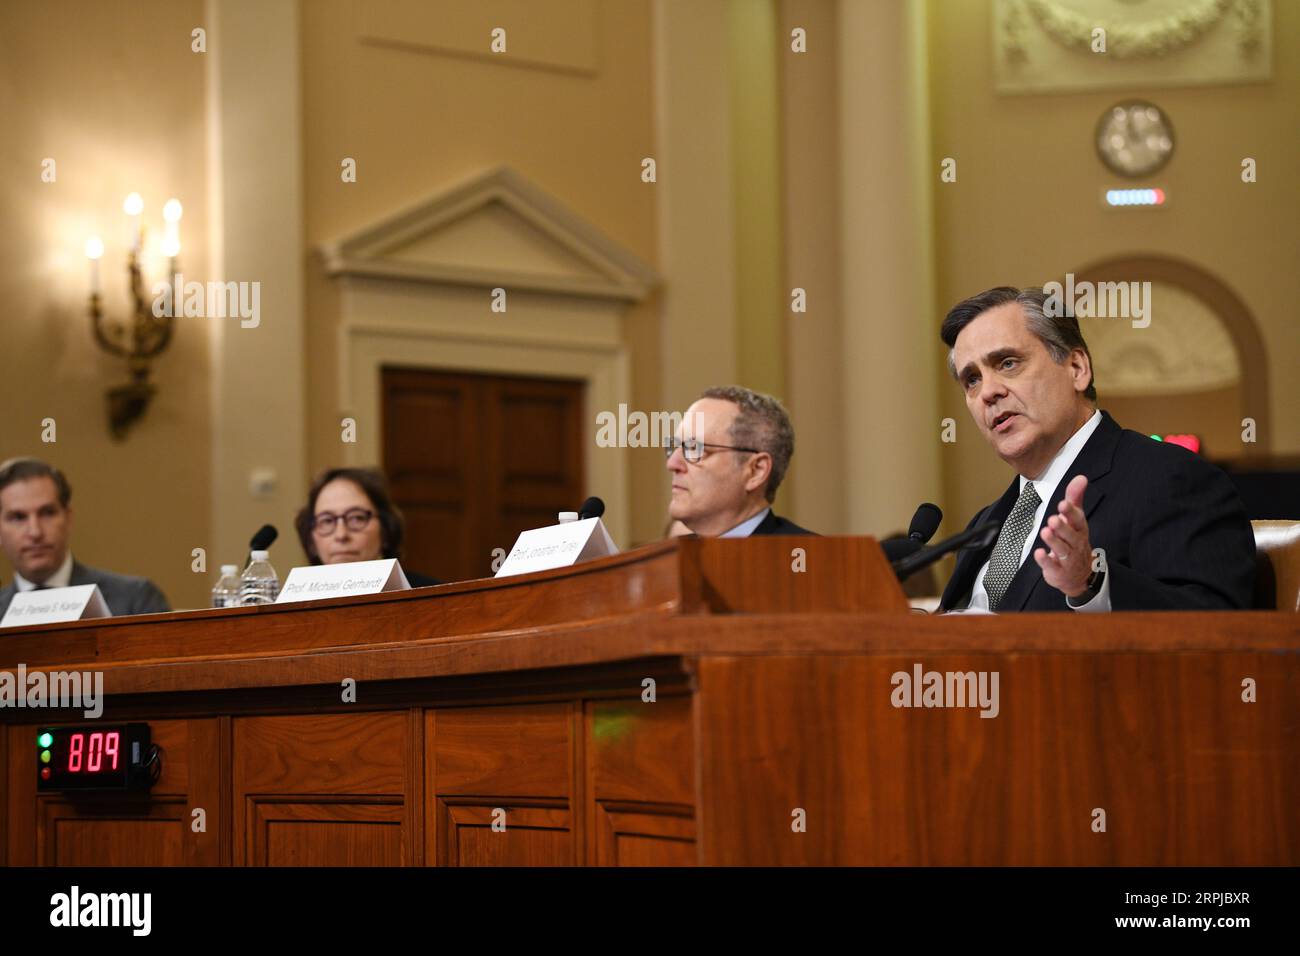 191204 -- WASHINGTON, Dec. 4, 2019 -- Jonathan Turley 1st R, professor of public interest law at the George Washington University Law School, testifies before the U.S. House Judiciary Committee on Capitol Hill in Washington D.C., the United States, on Dec. 4, 2019. The Democrat-led House Judiciary Committee took over a months-long impeachment proceeding into U.S. President Donald Trump by holding its first hearing on Wednesday.  U.S.-WASHINGTON D.C.-HOUSE-JUDICIARY COMMITTEE-HEARING-IMPEACHMENT INQUIRY-TRUMP LiuxJie PUBLICATIONxNOTxINxCHN Stock Photo